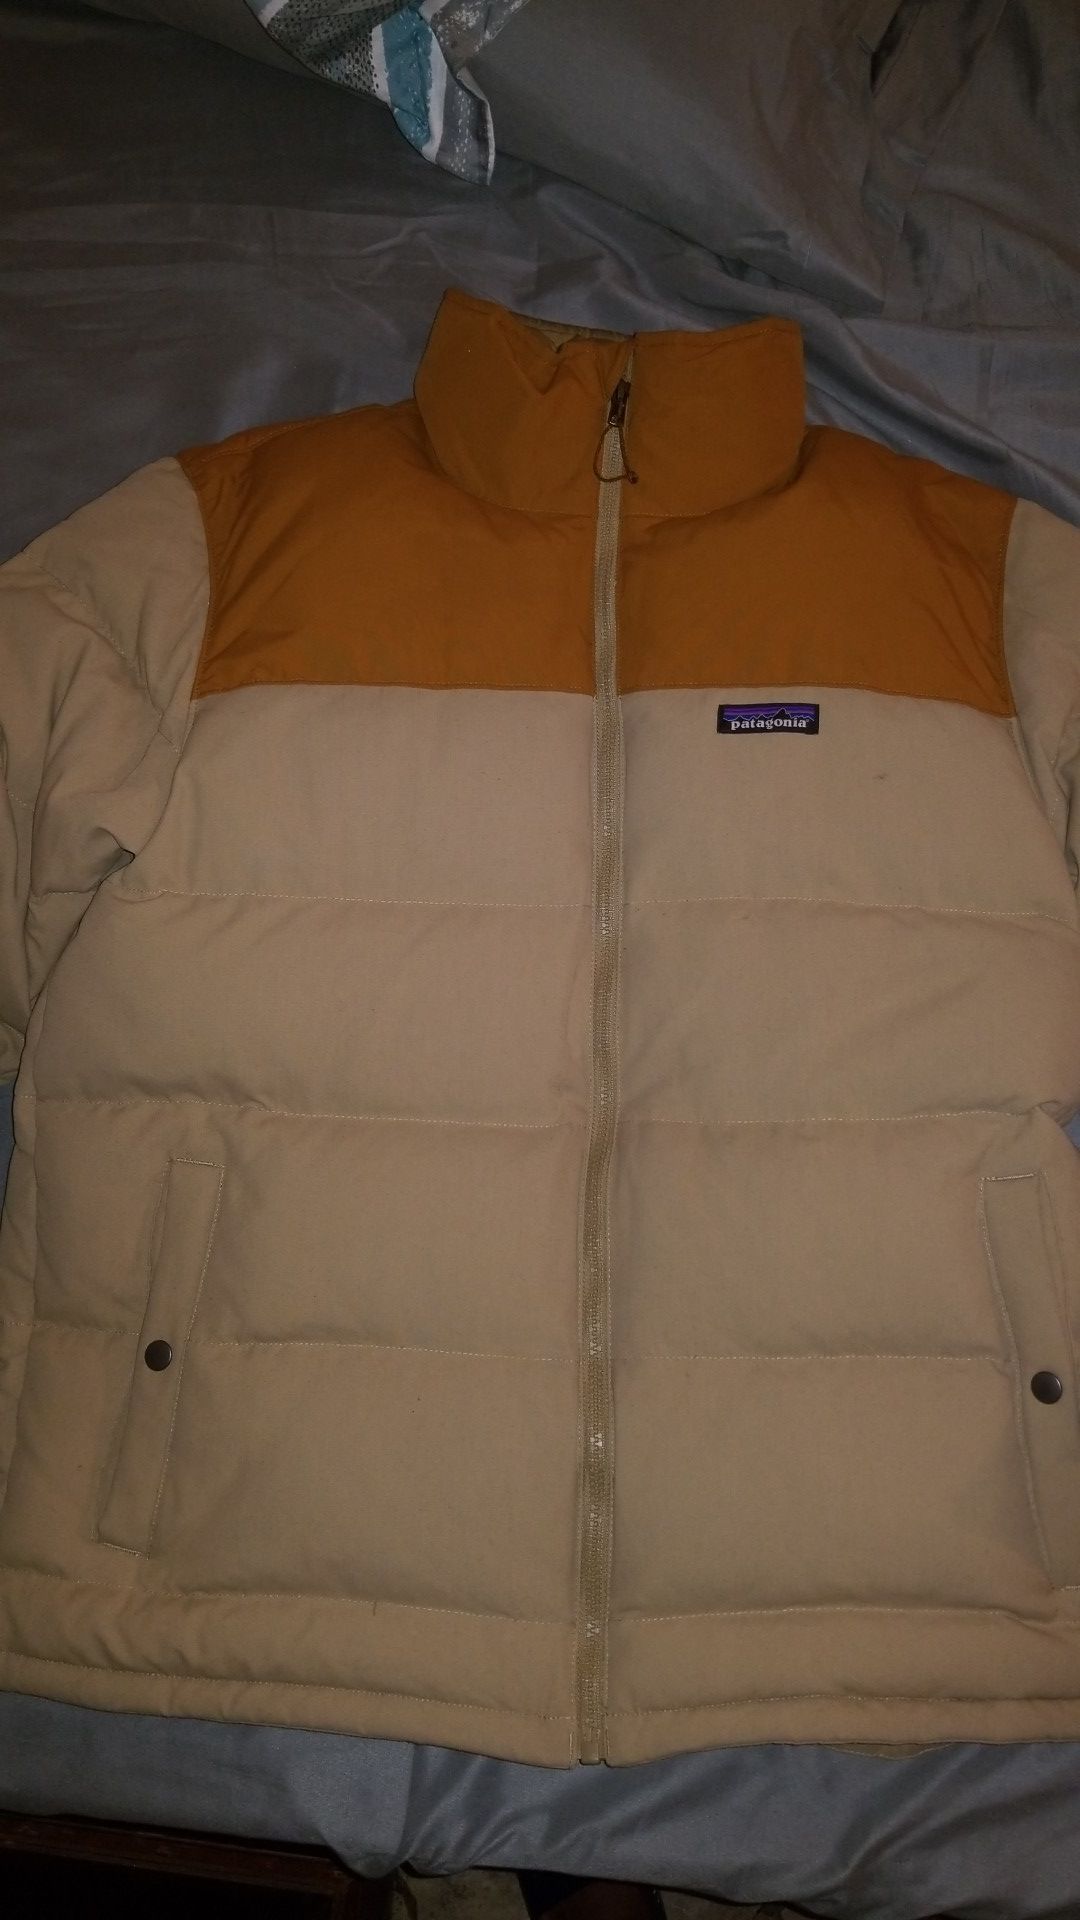 Patagonia wheat on wheat bubble 300 price are negotiable n trades are accepted